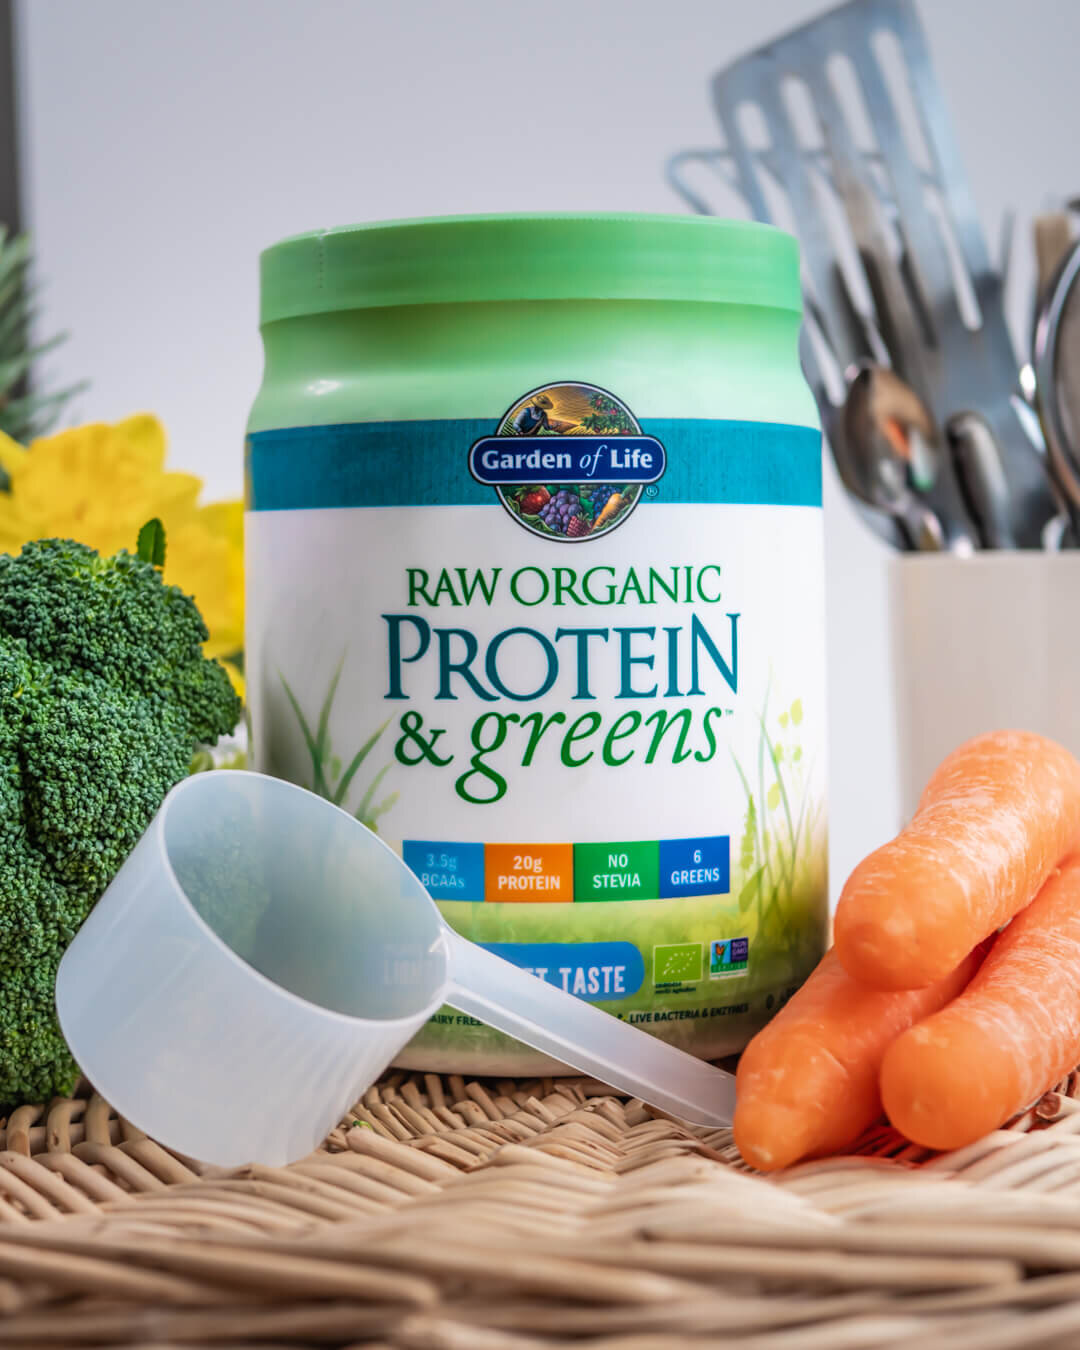 Garden of Life RAW organic protein captured next to three carrots, a piece of broccoli and a scoop-1 (1).jpg